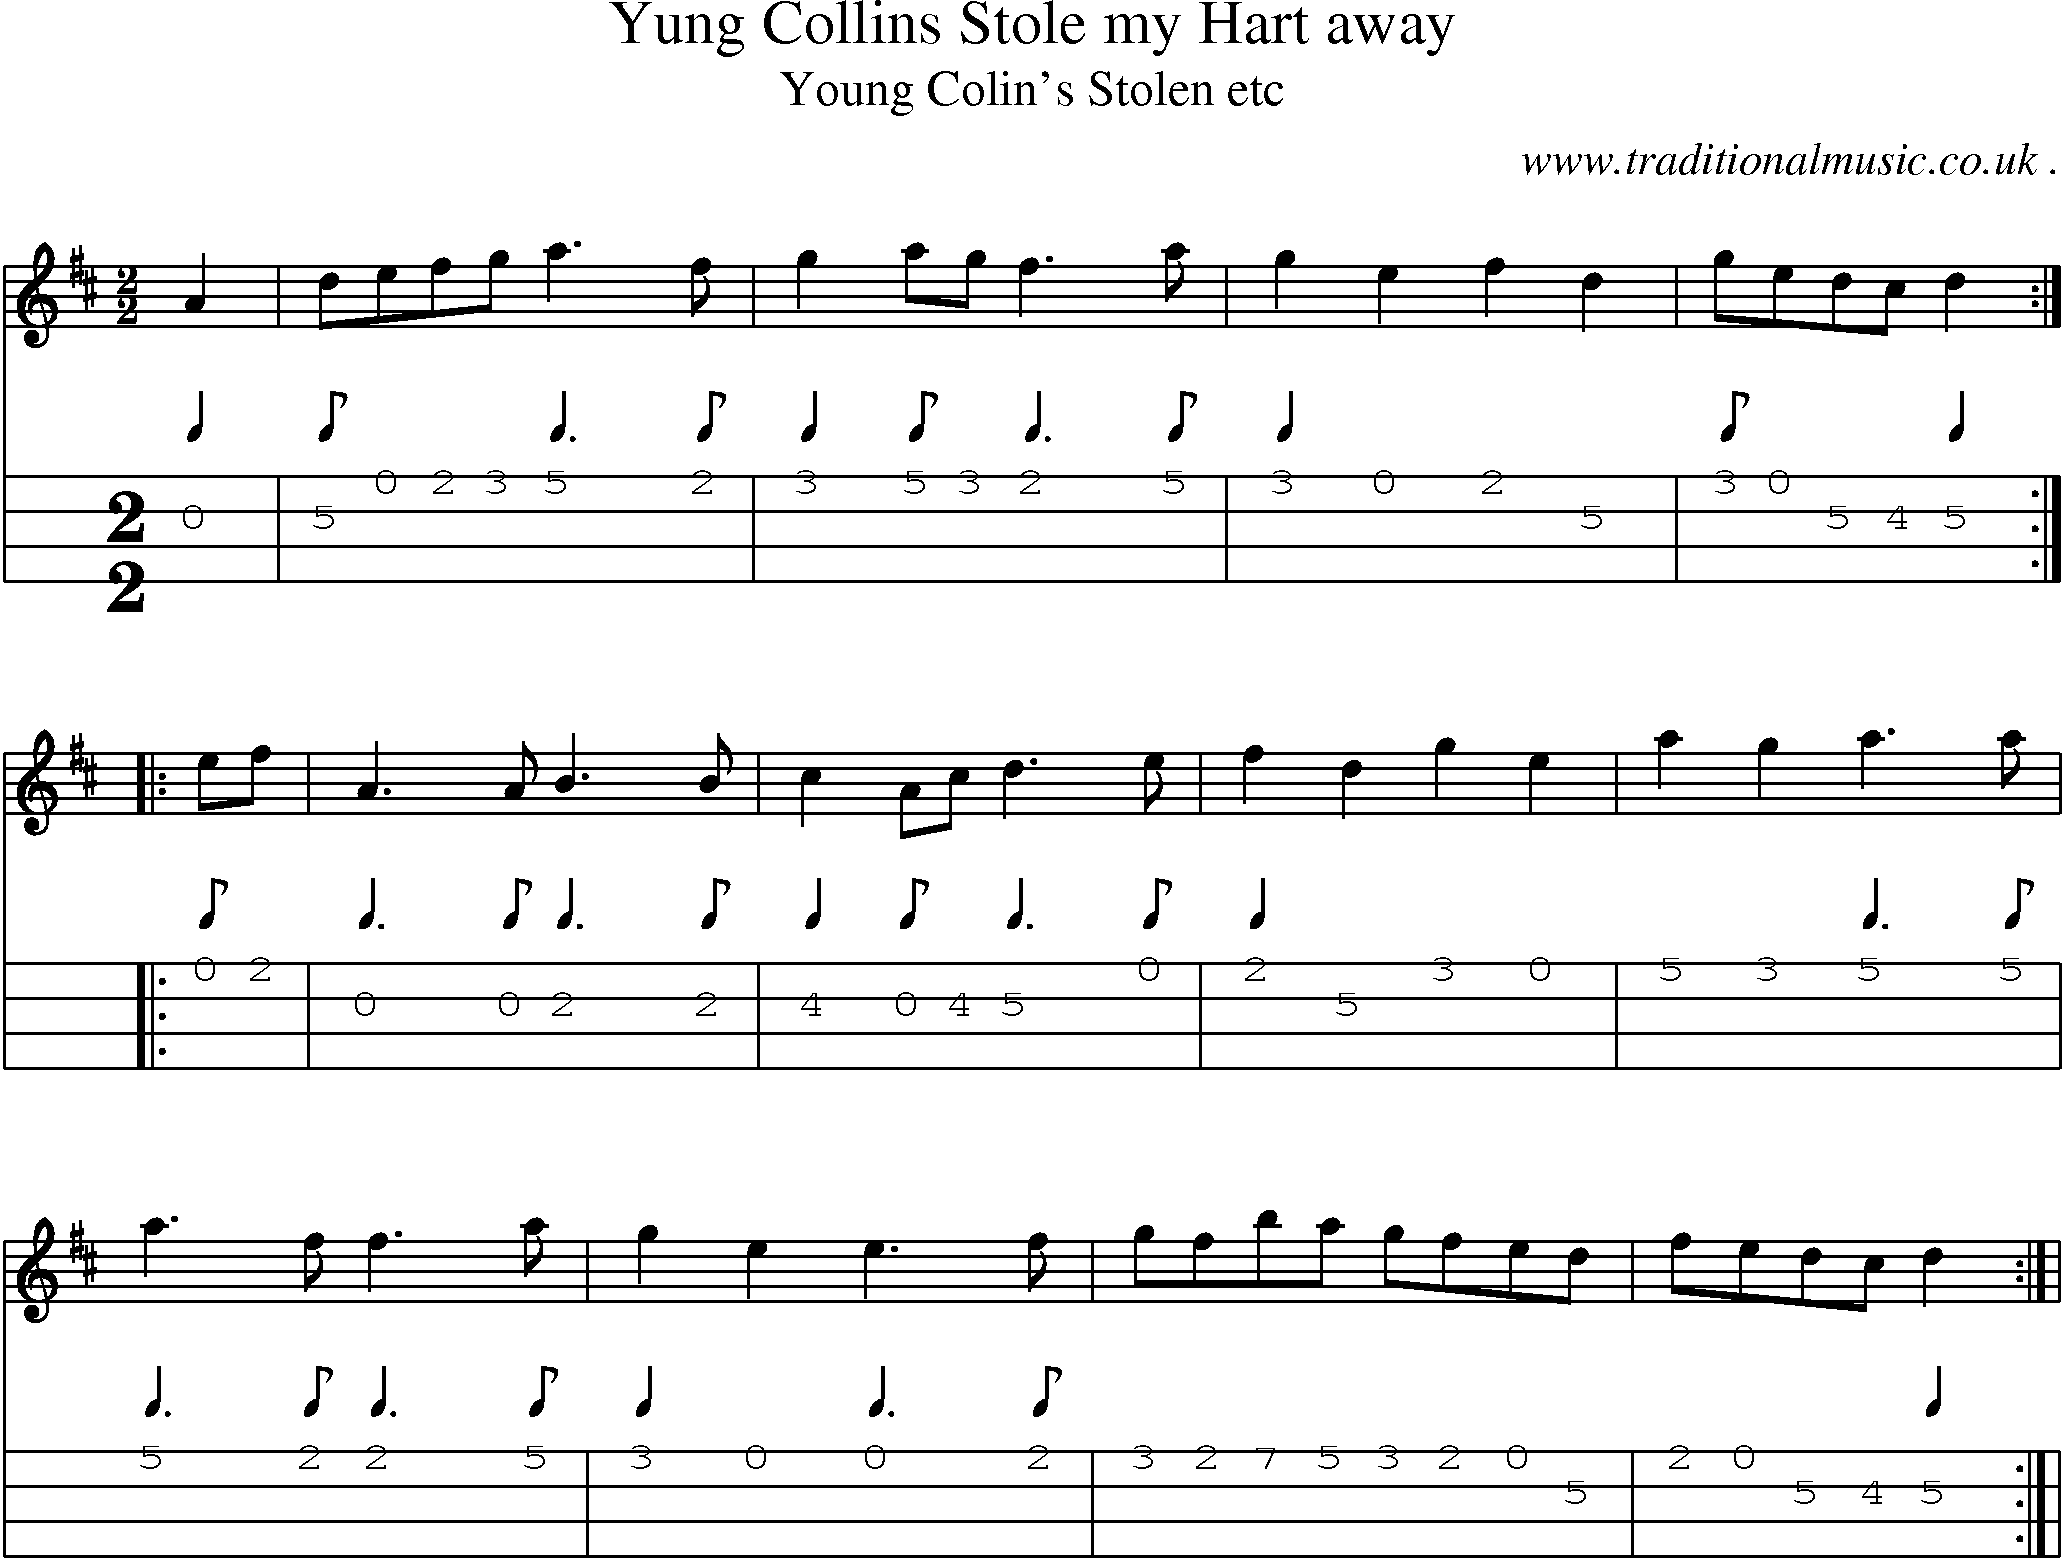 Sheet-Music and Mandolin Tabs for Yung Collins Stole My Hart Away